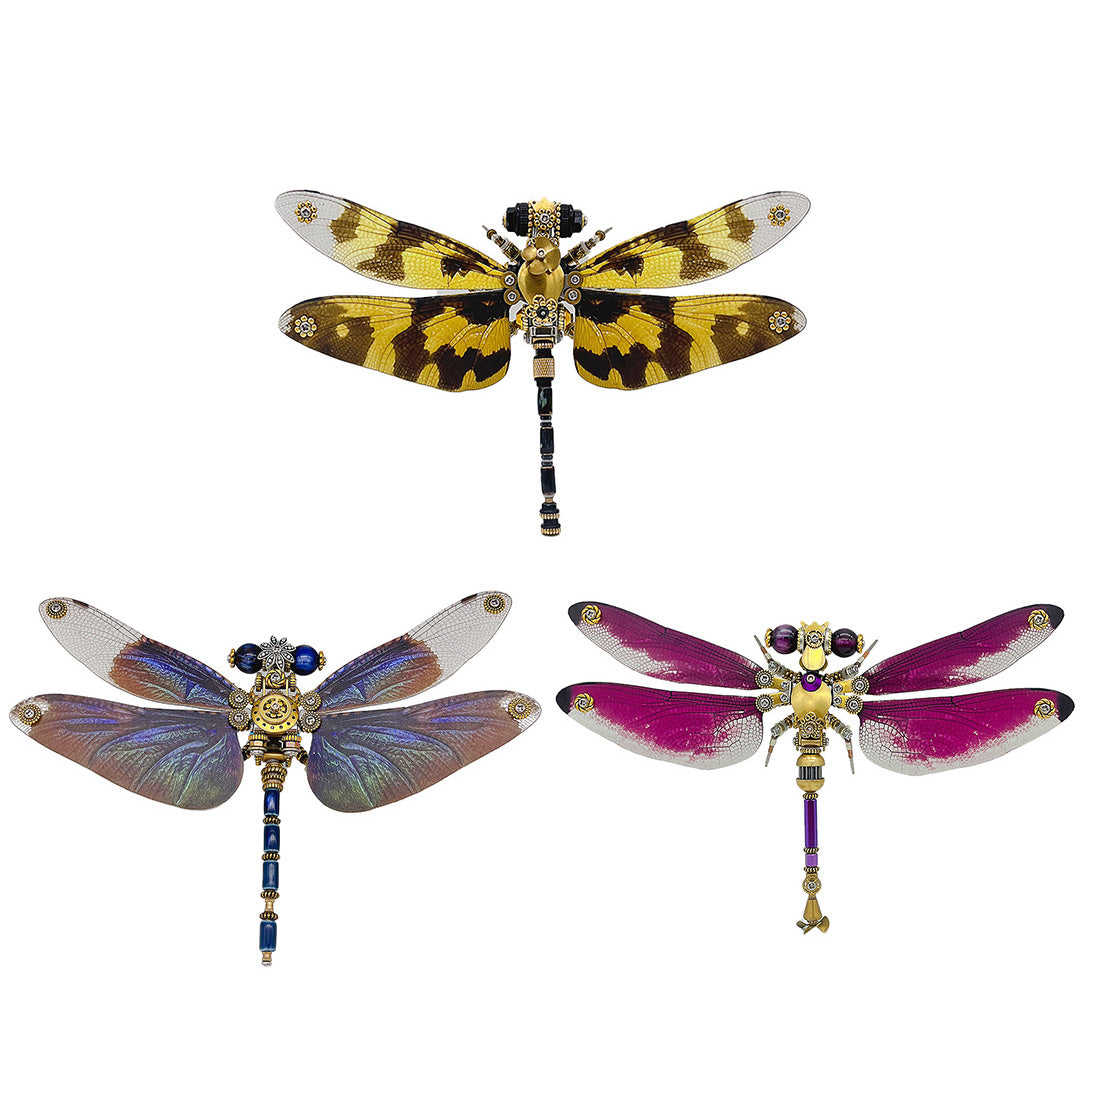 3pcs/set Steampunk Dragonfly 3D Metal Puzzle for Adults